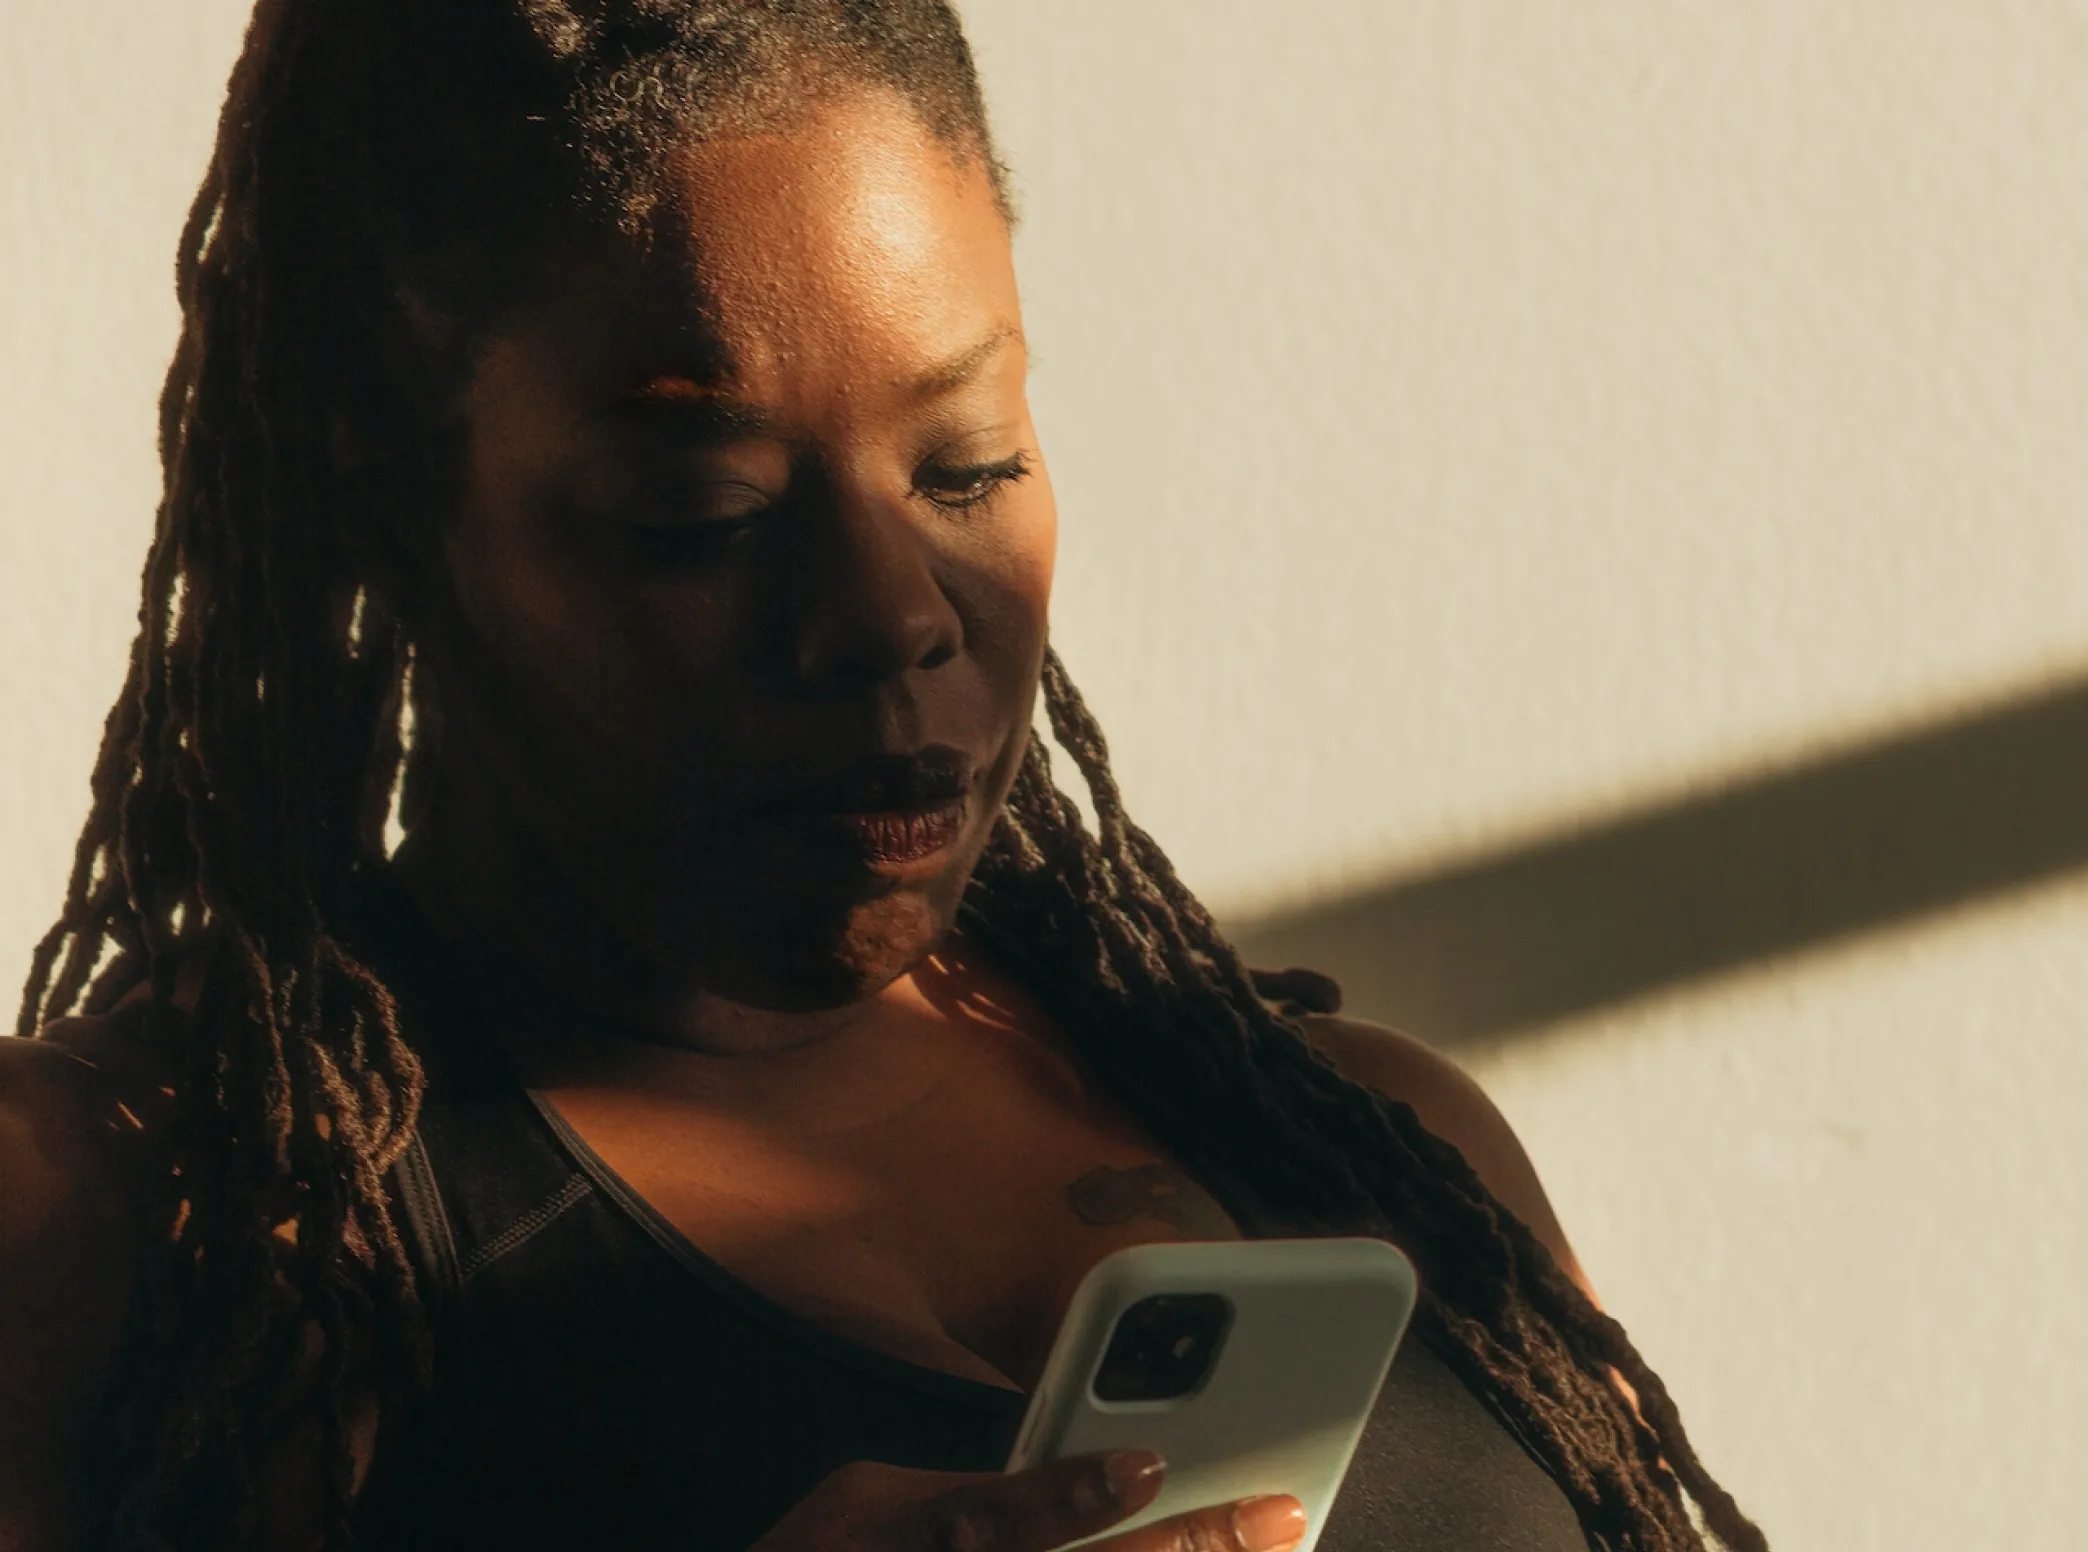 a woman with dreadlocks looking at a cell phone